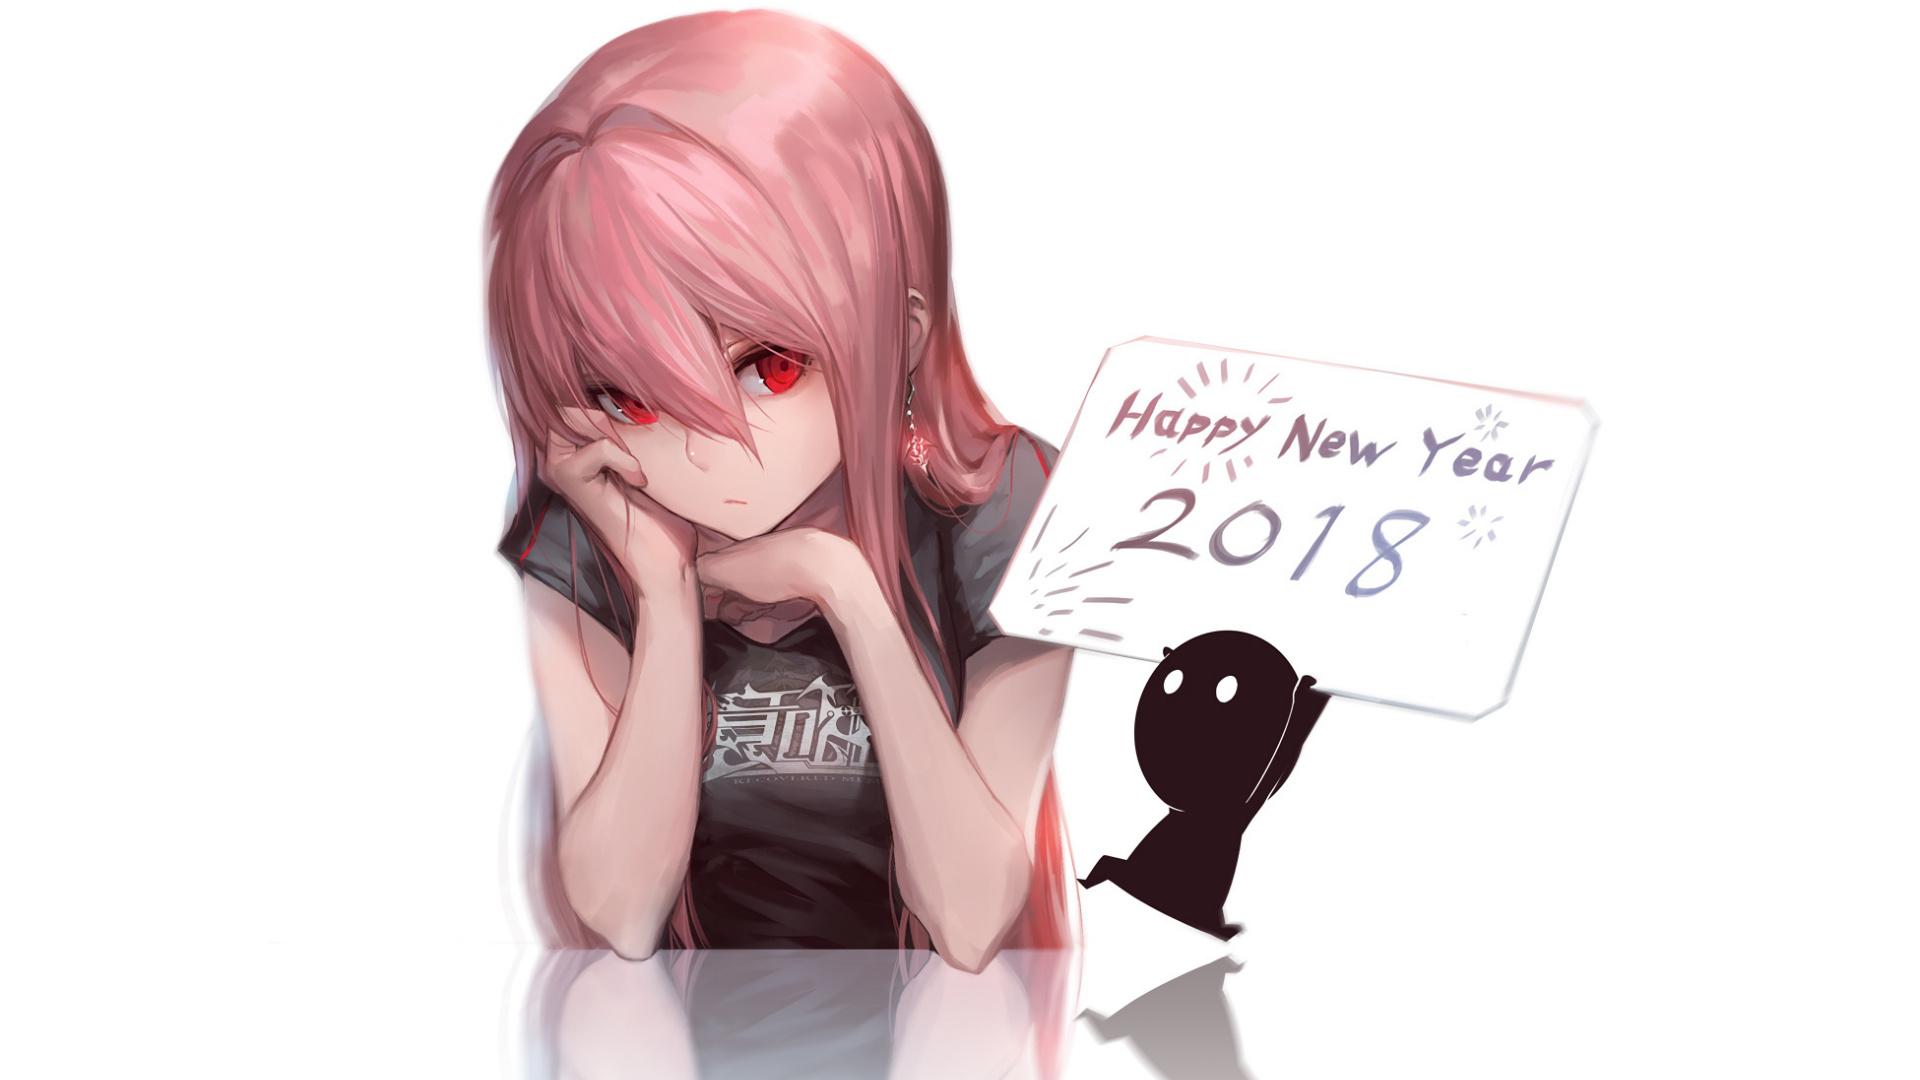 Wallpaper Red Eyes, Anime Girl, Sad, Happy New Year, New